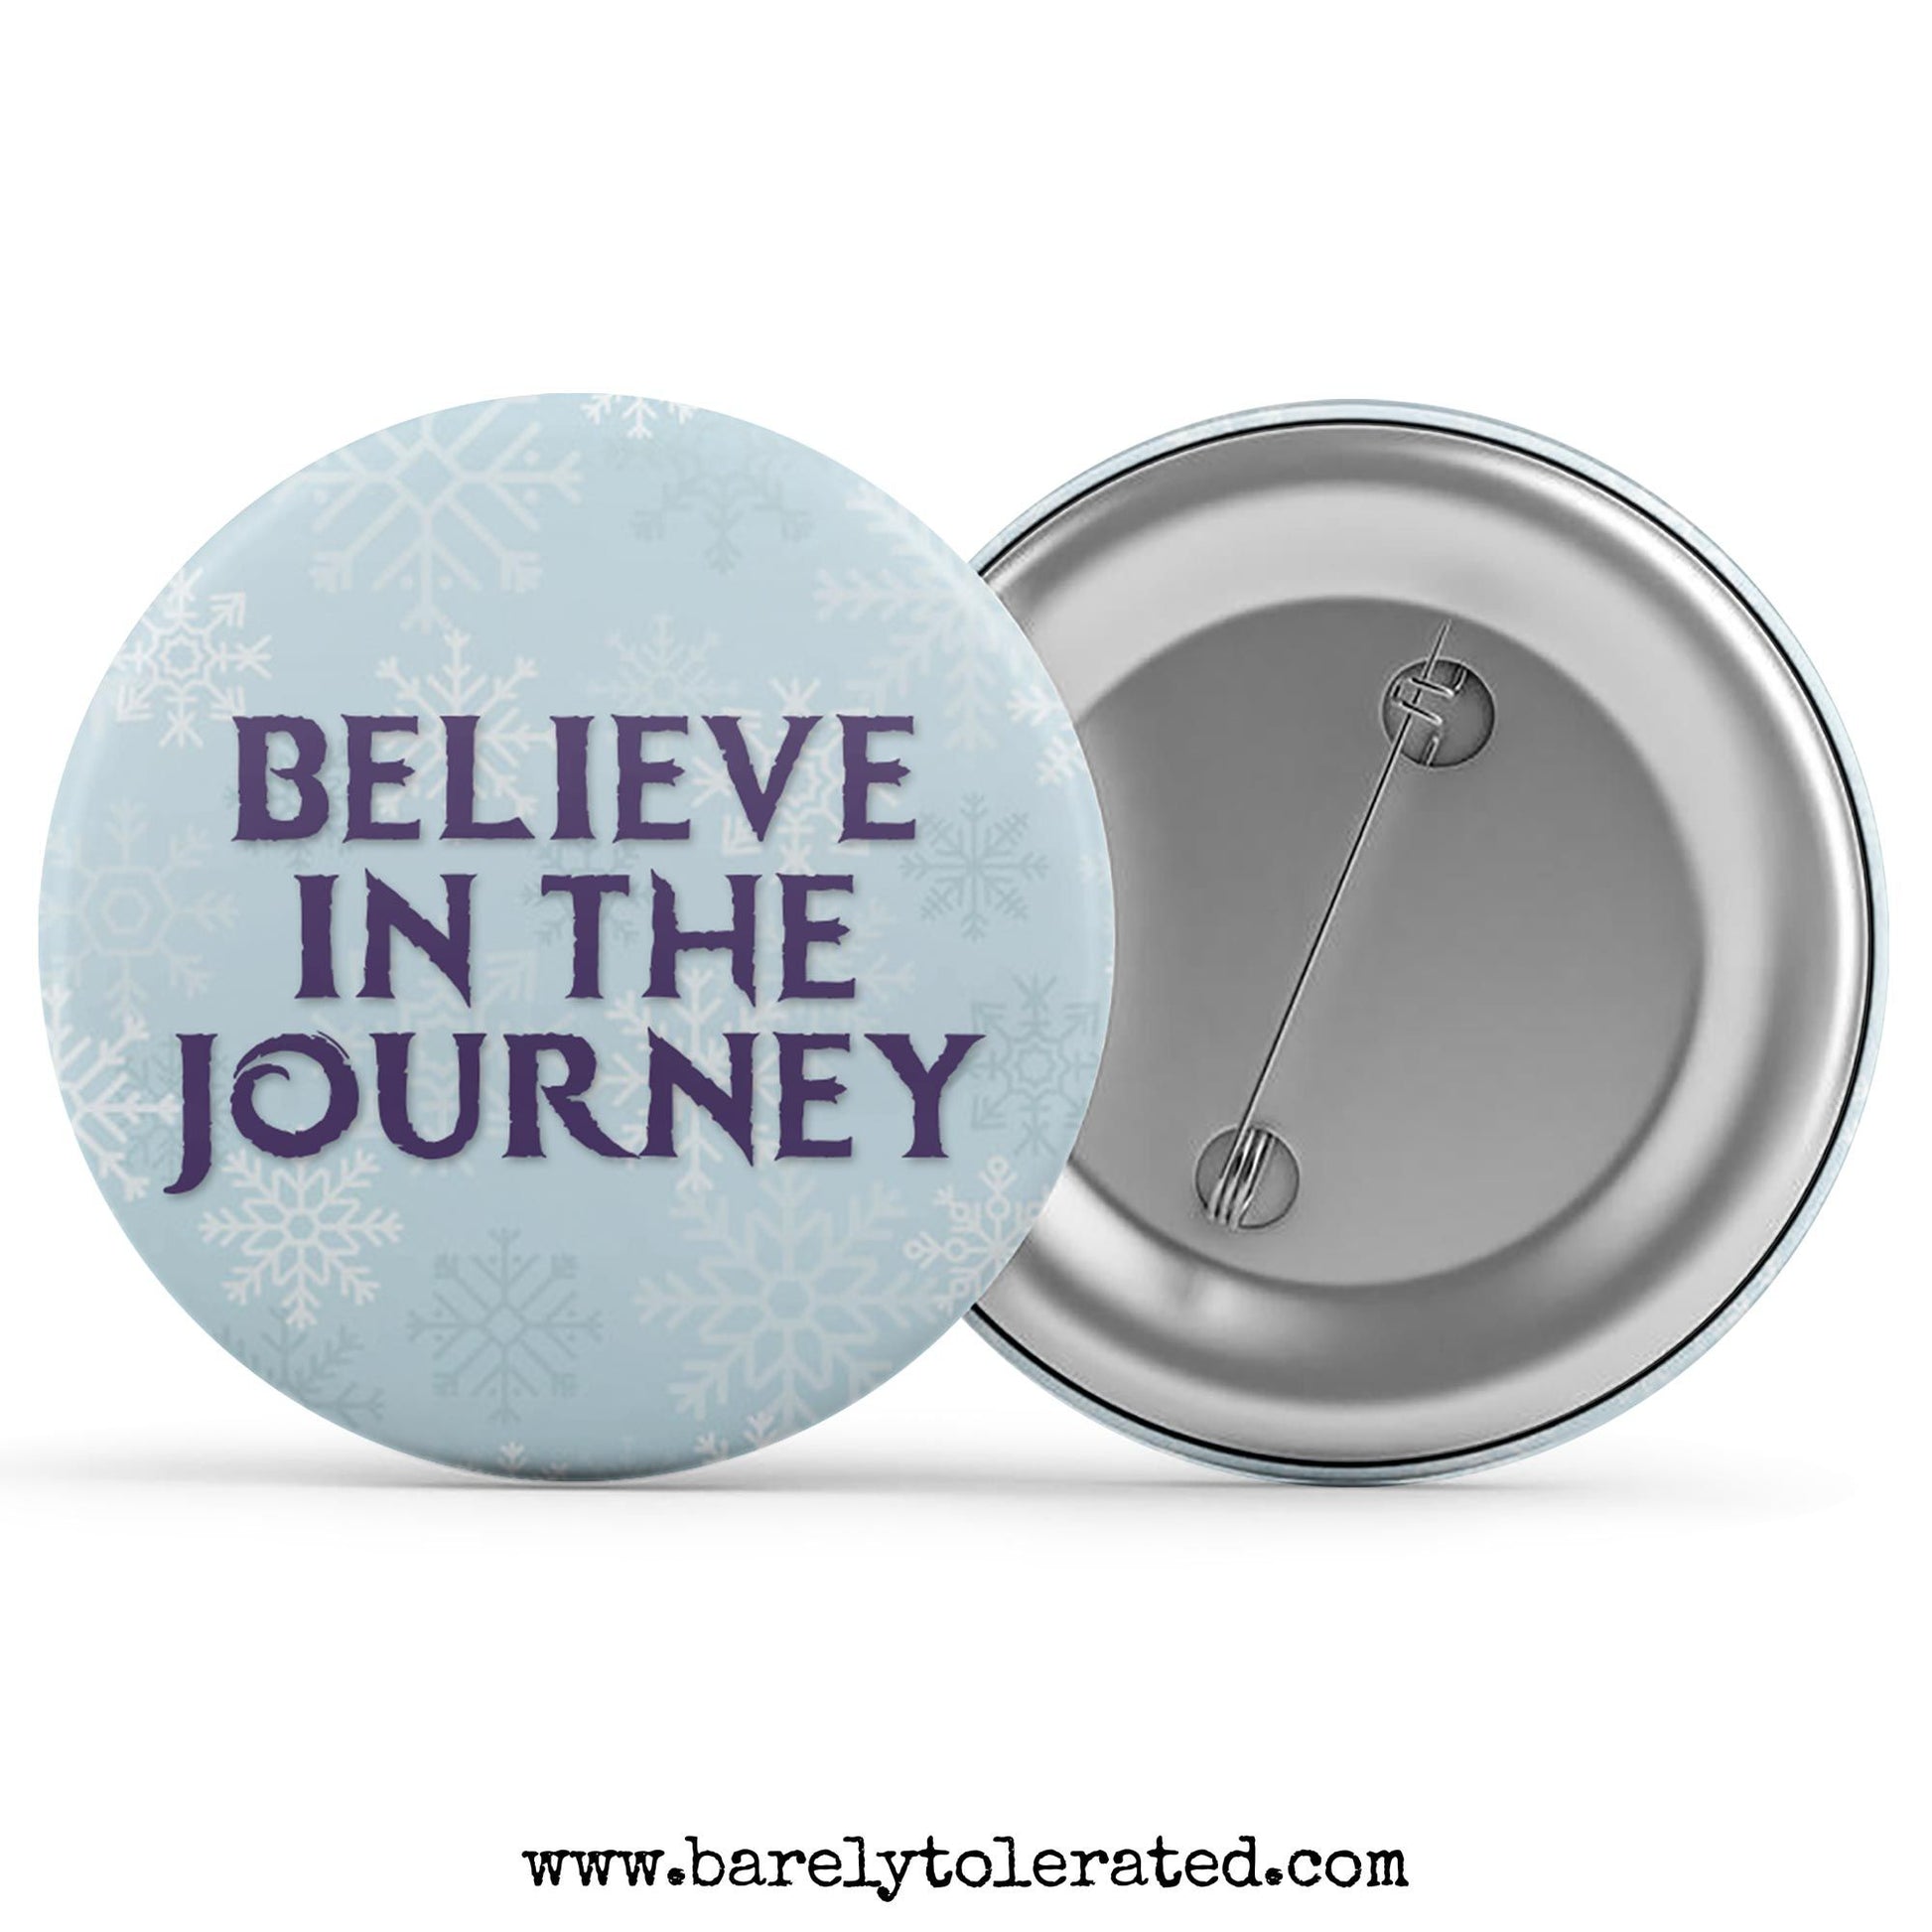 Believe in the Journey Image